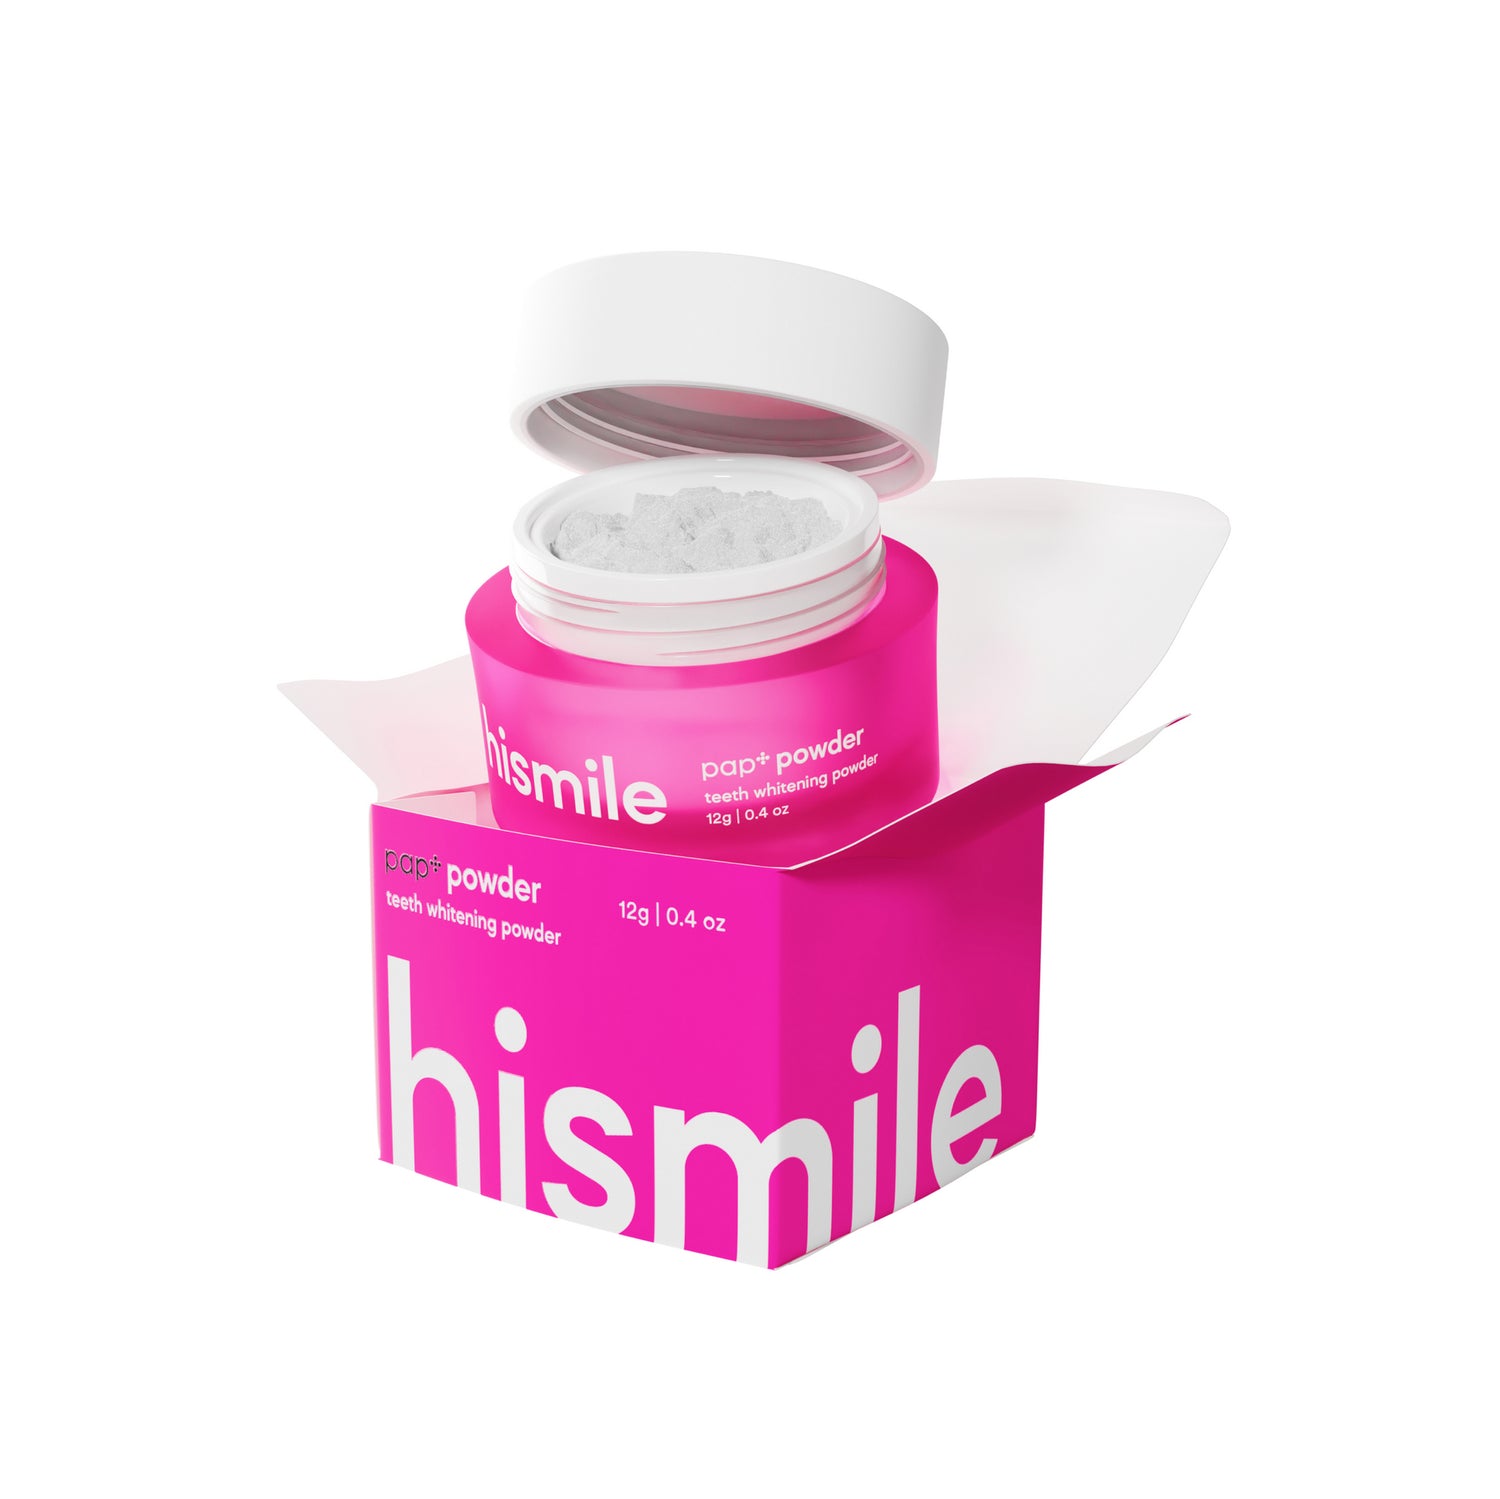 Hismile PAP+ Whitening Powder 12g out of the box with lid off